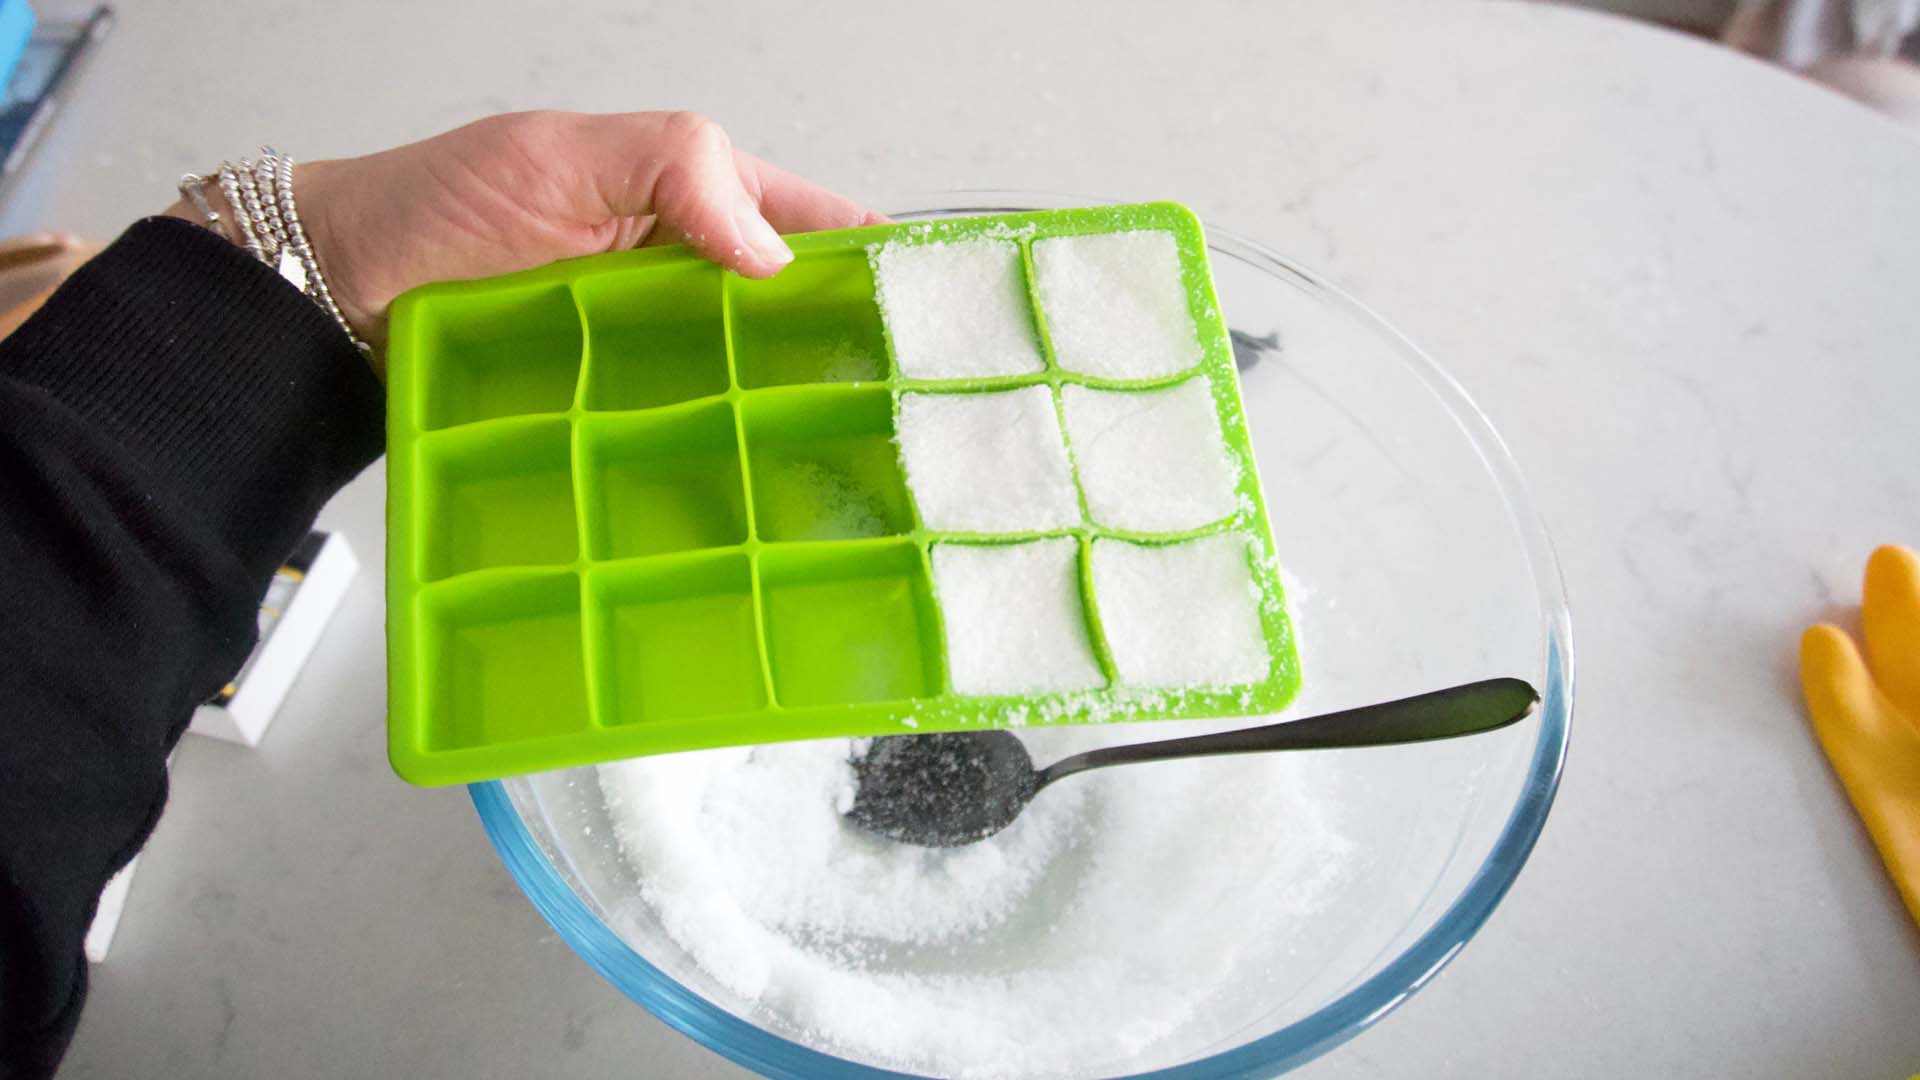 Filling the ice cube tray with the toilet bomb mixture